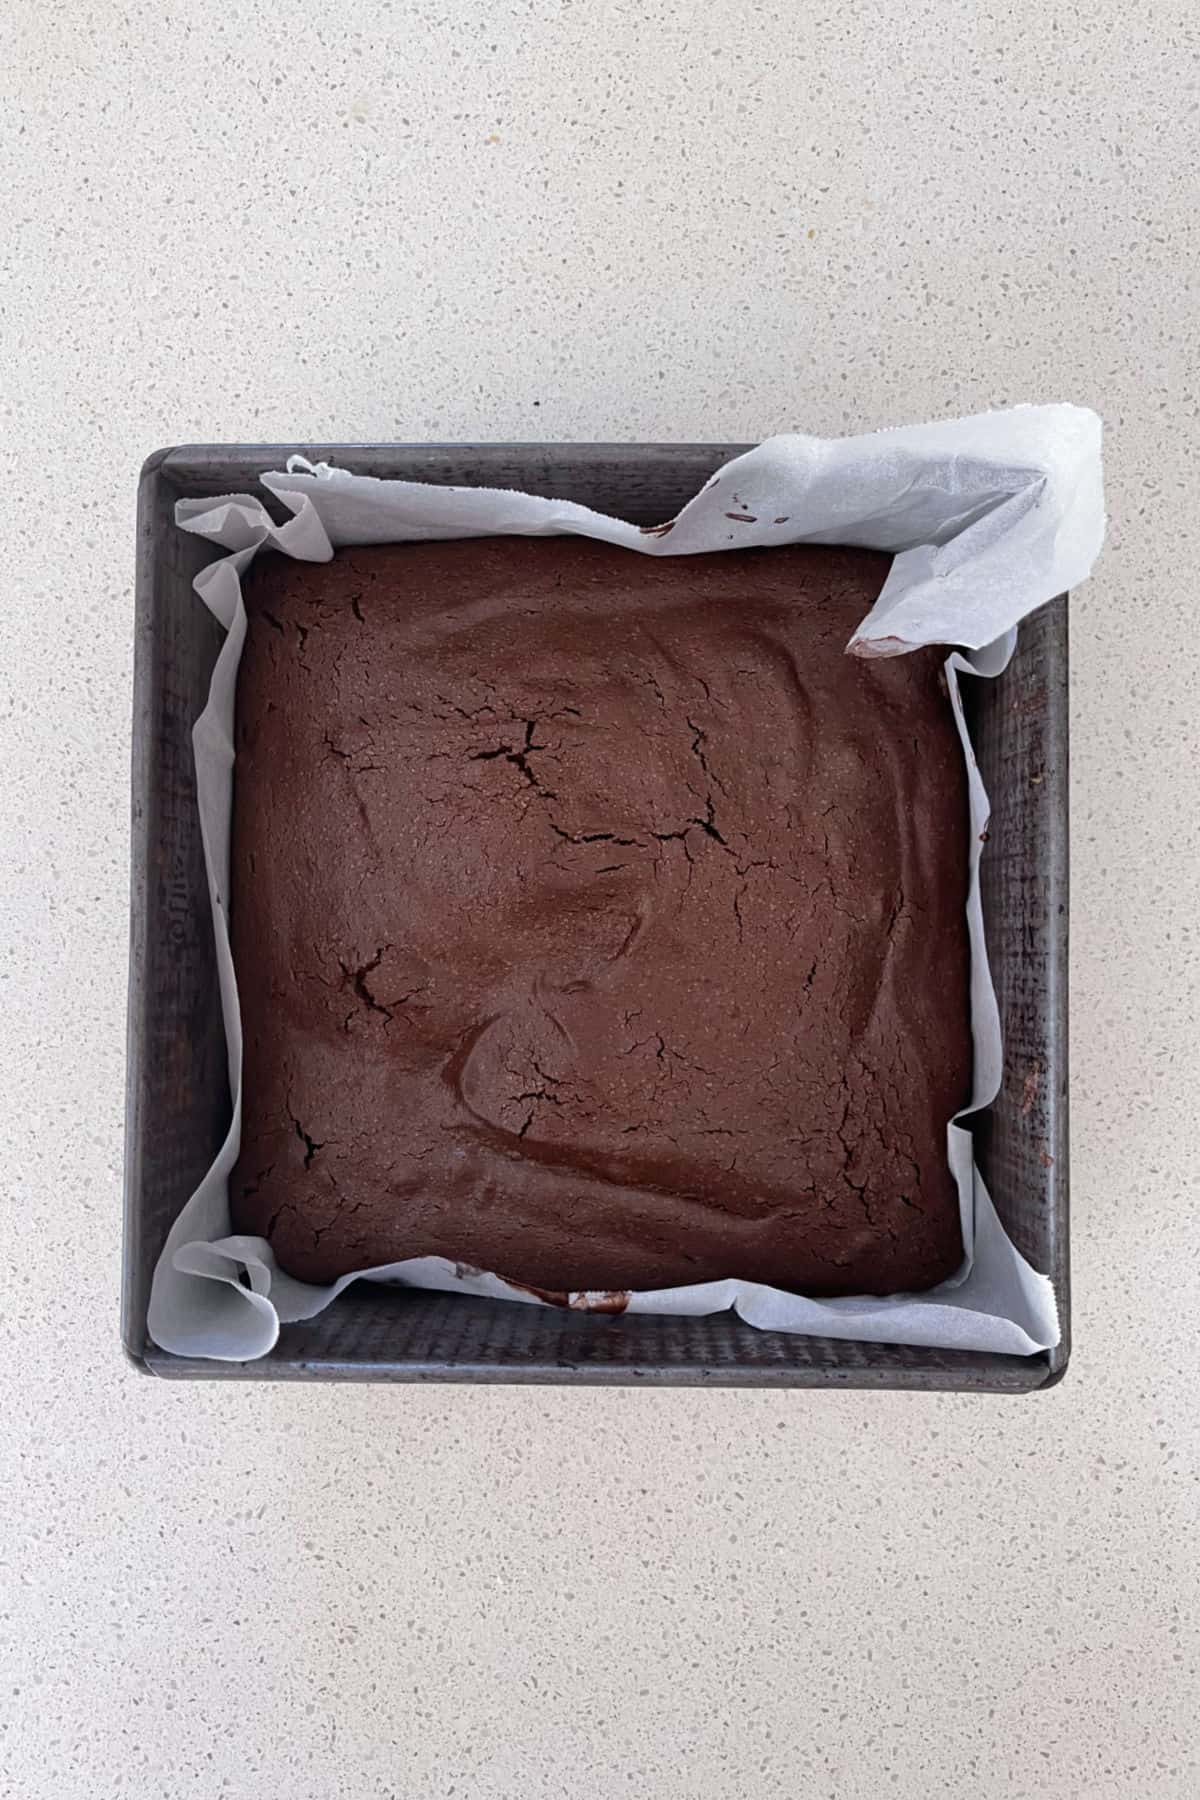 Thermomix Brownies straight from the oven in a baking dish.